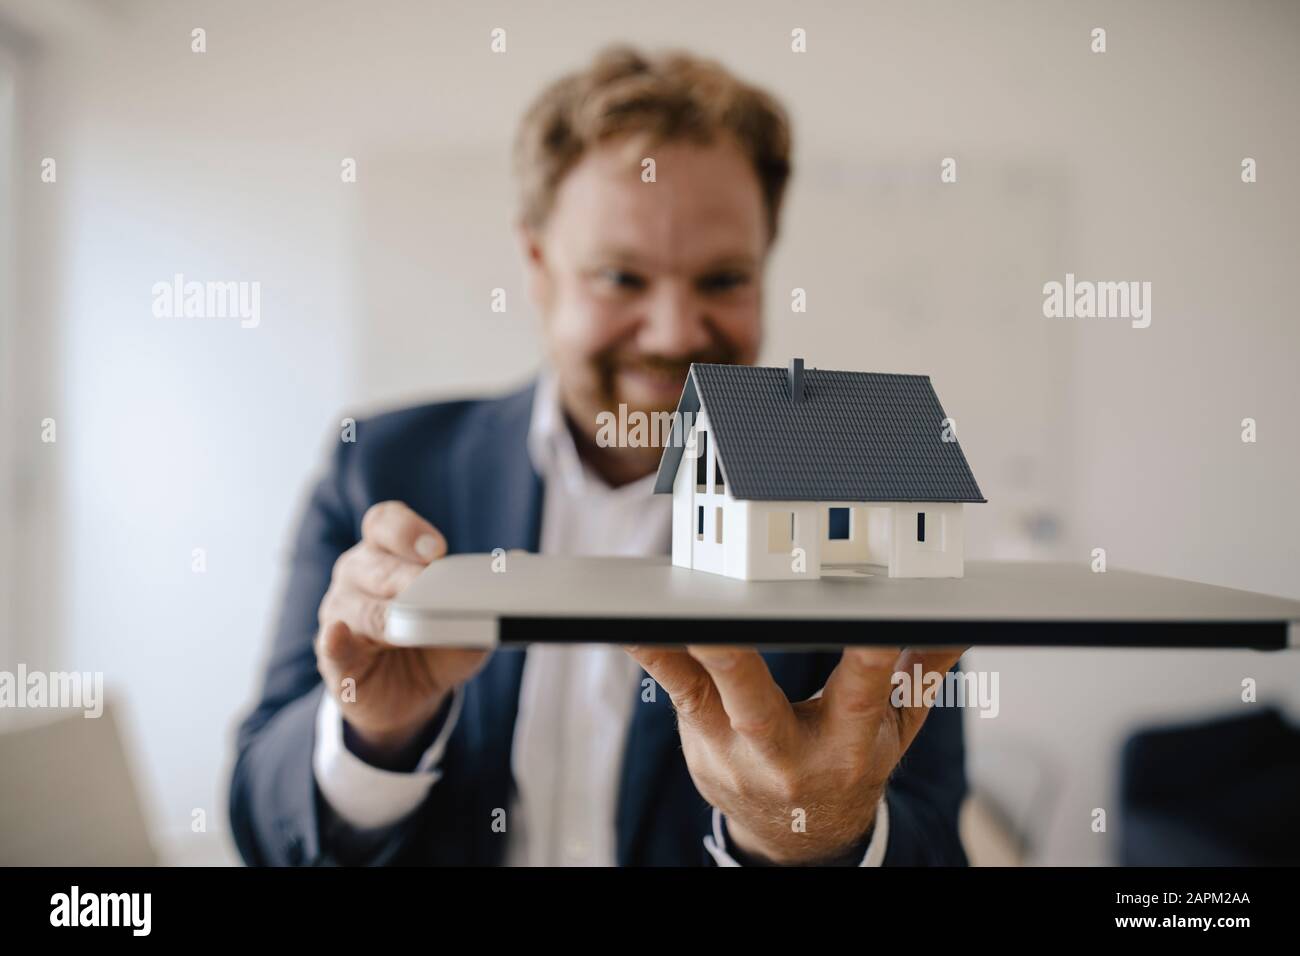 Businessman holding model house in office Stock Photo